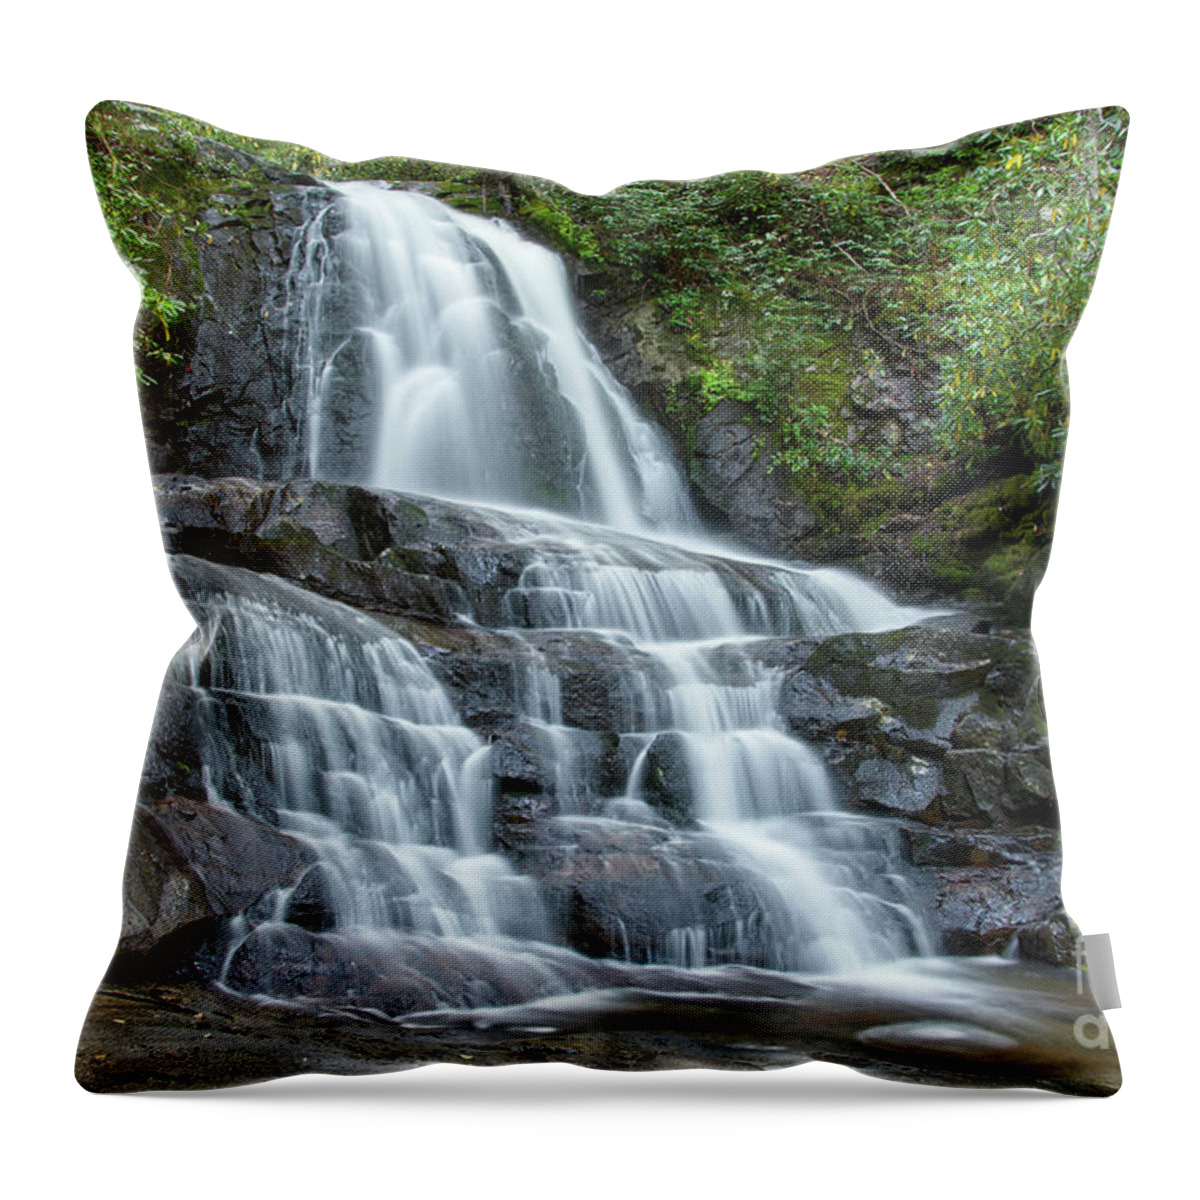 Laurel Falls Throw Pillow featuring the photograph Laurel Falls 15 by Phil Perkins